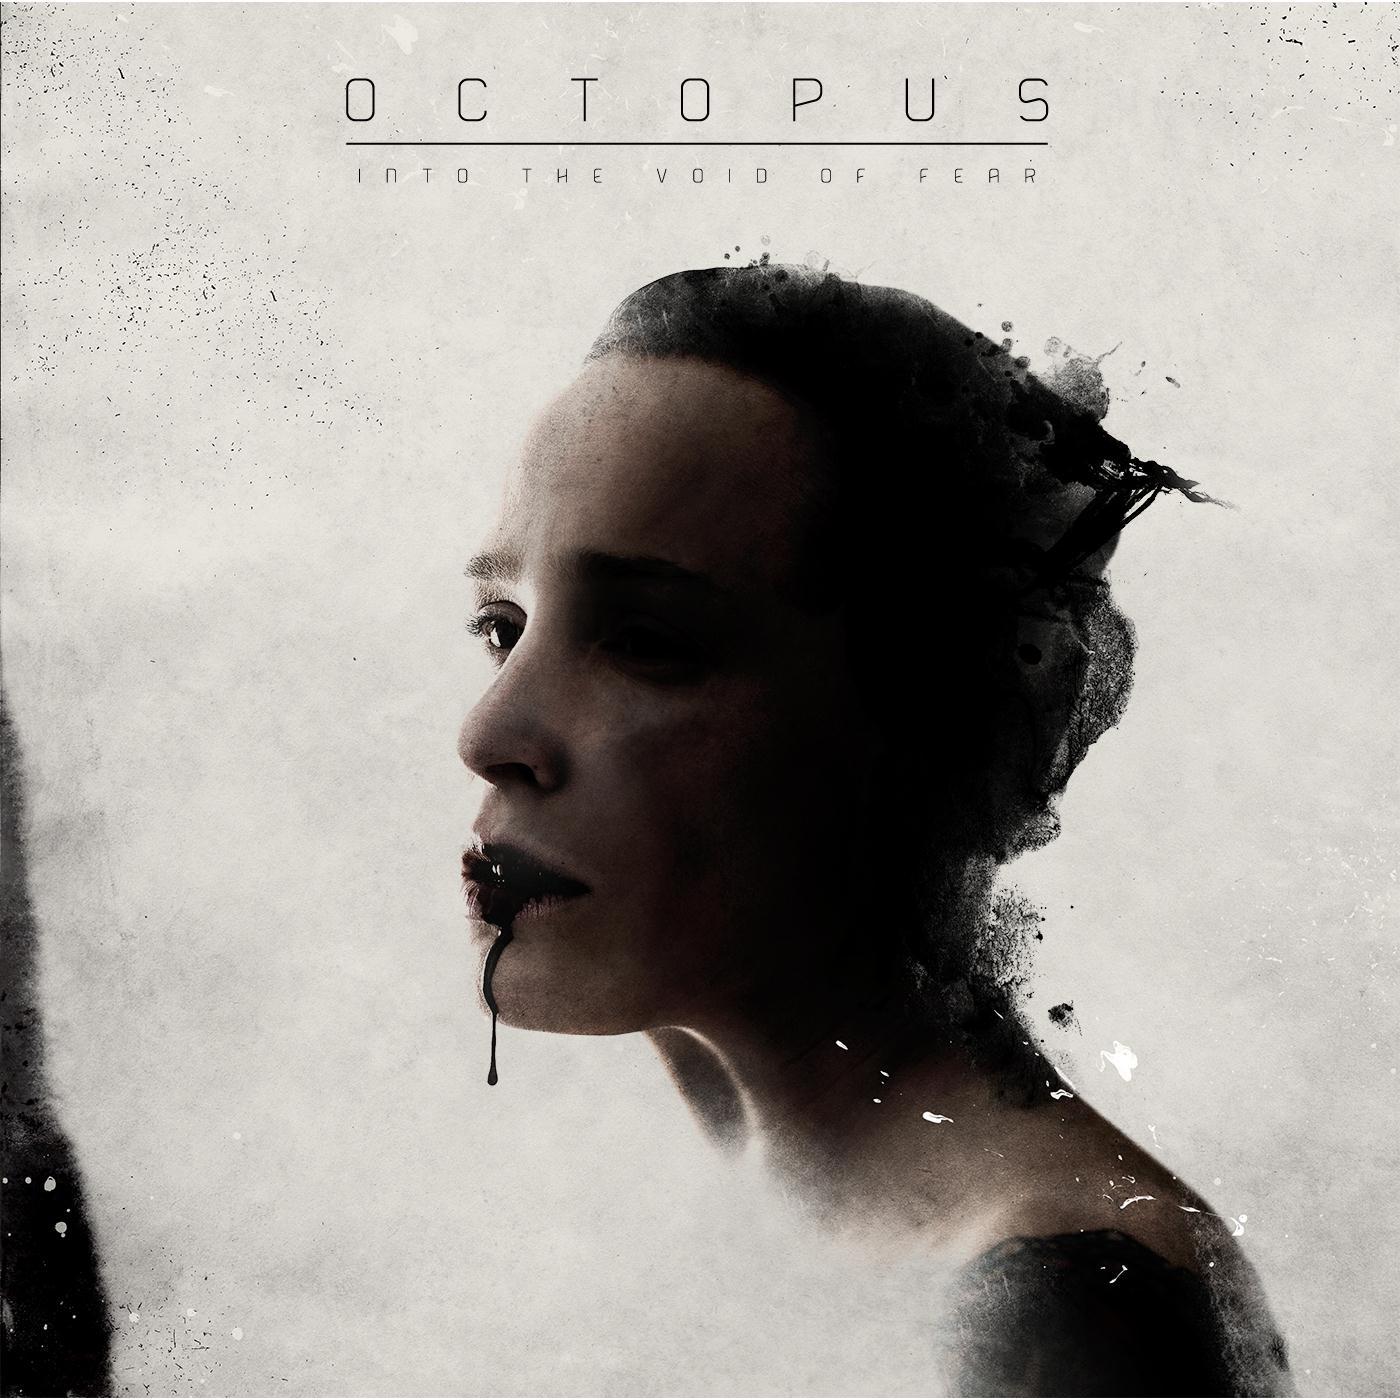 Octopus - Confront the Fear Beyond